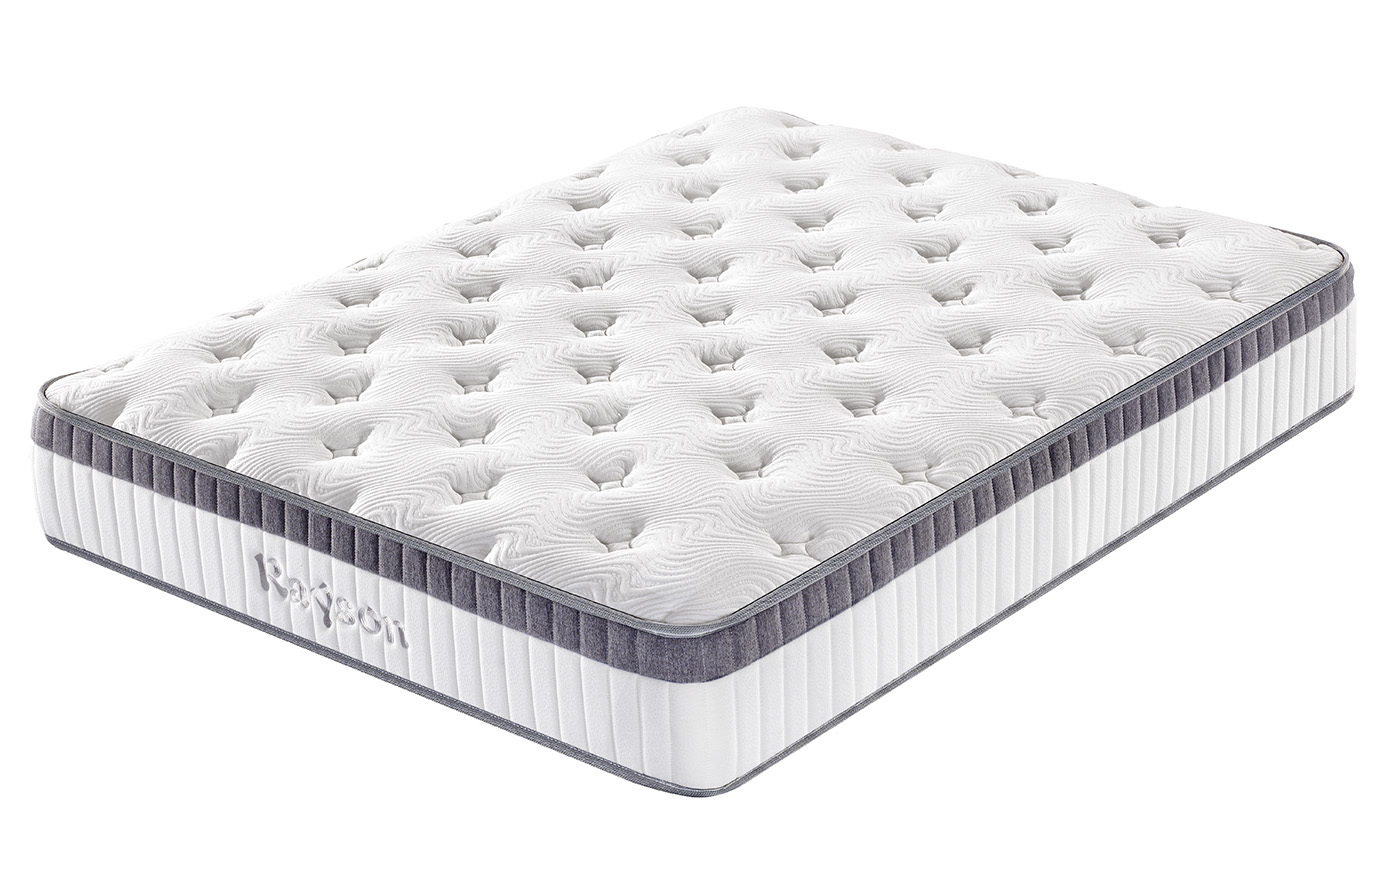 chic design pocket sprung double mattress wholesale high density Synwin